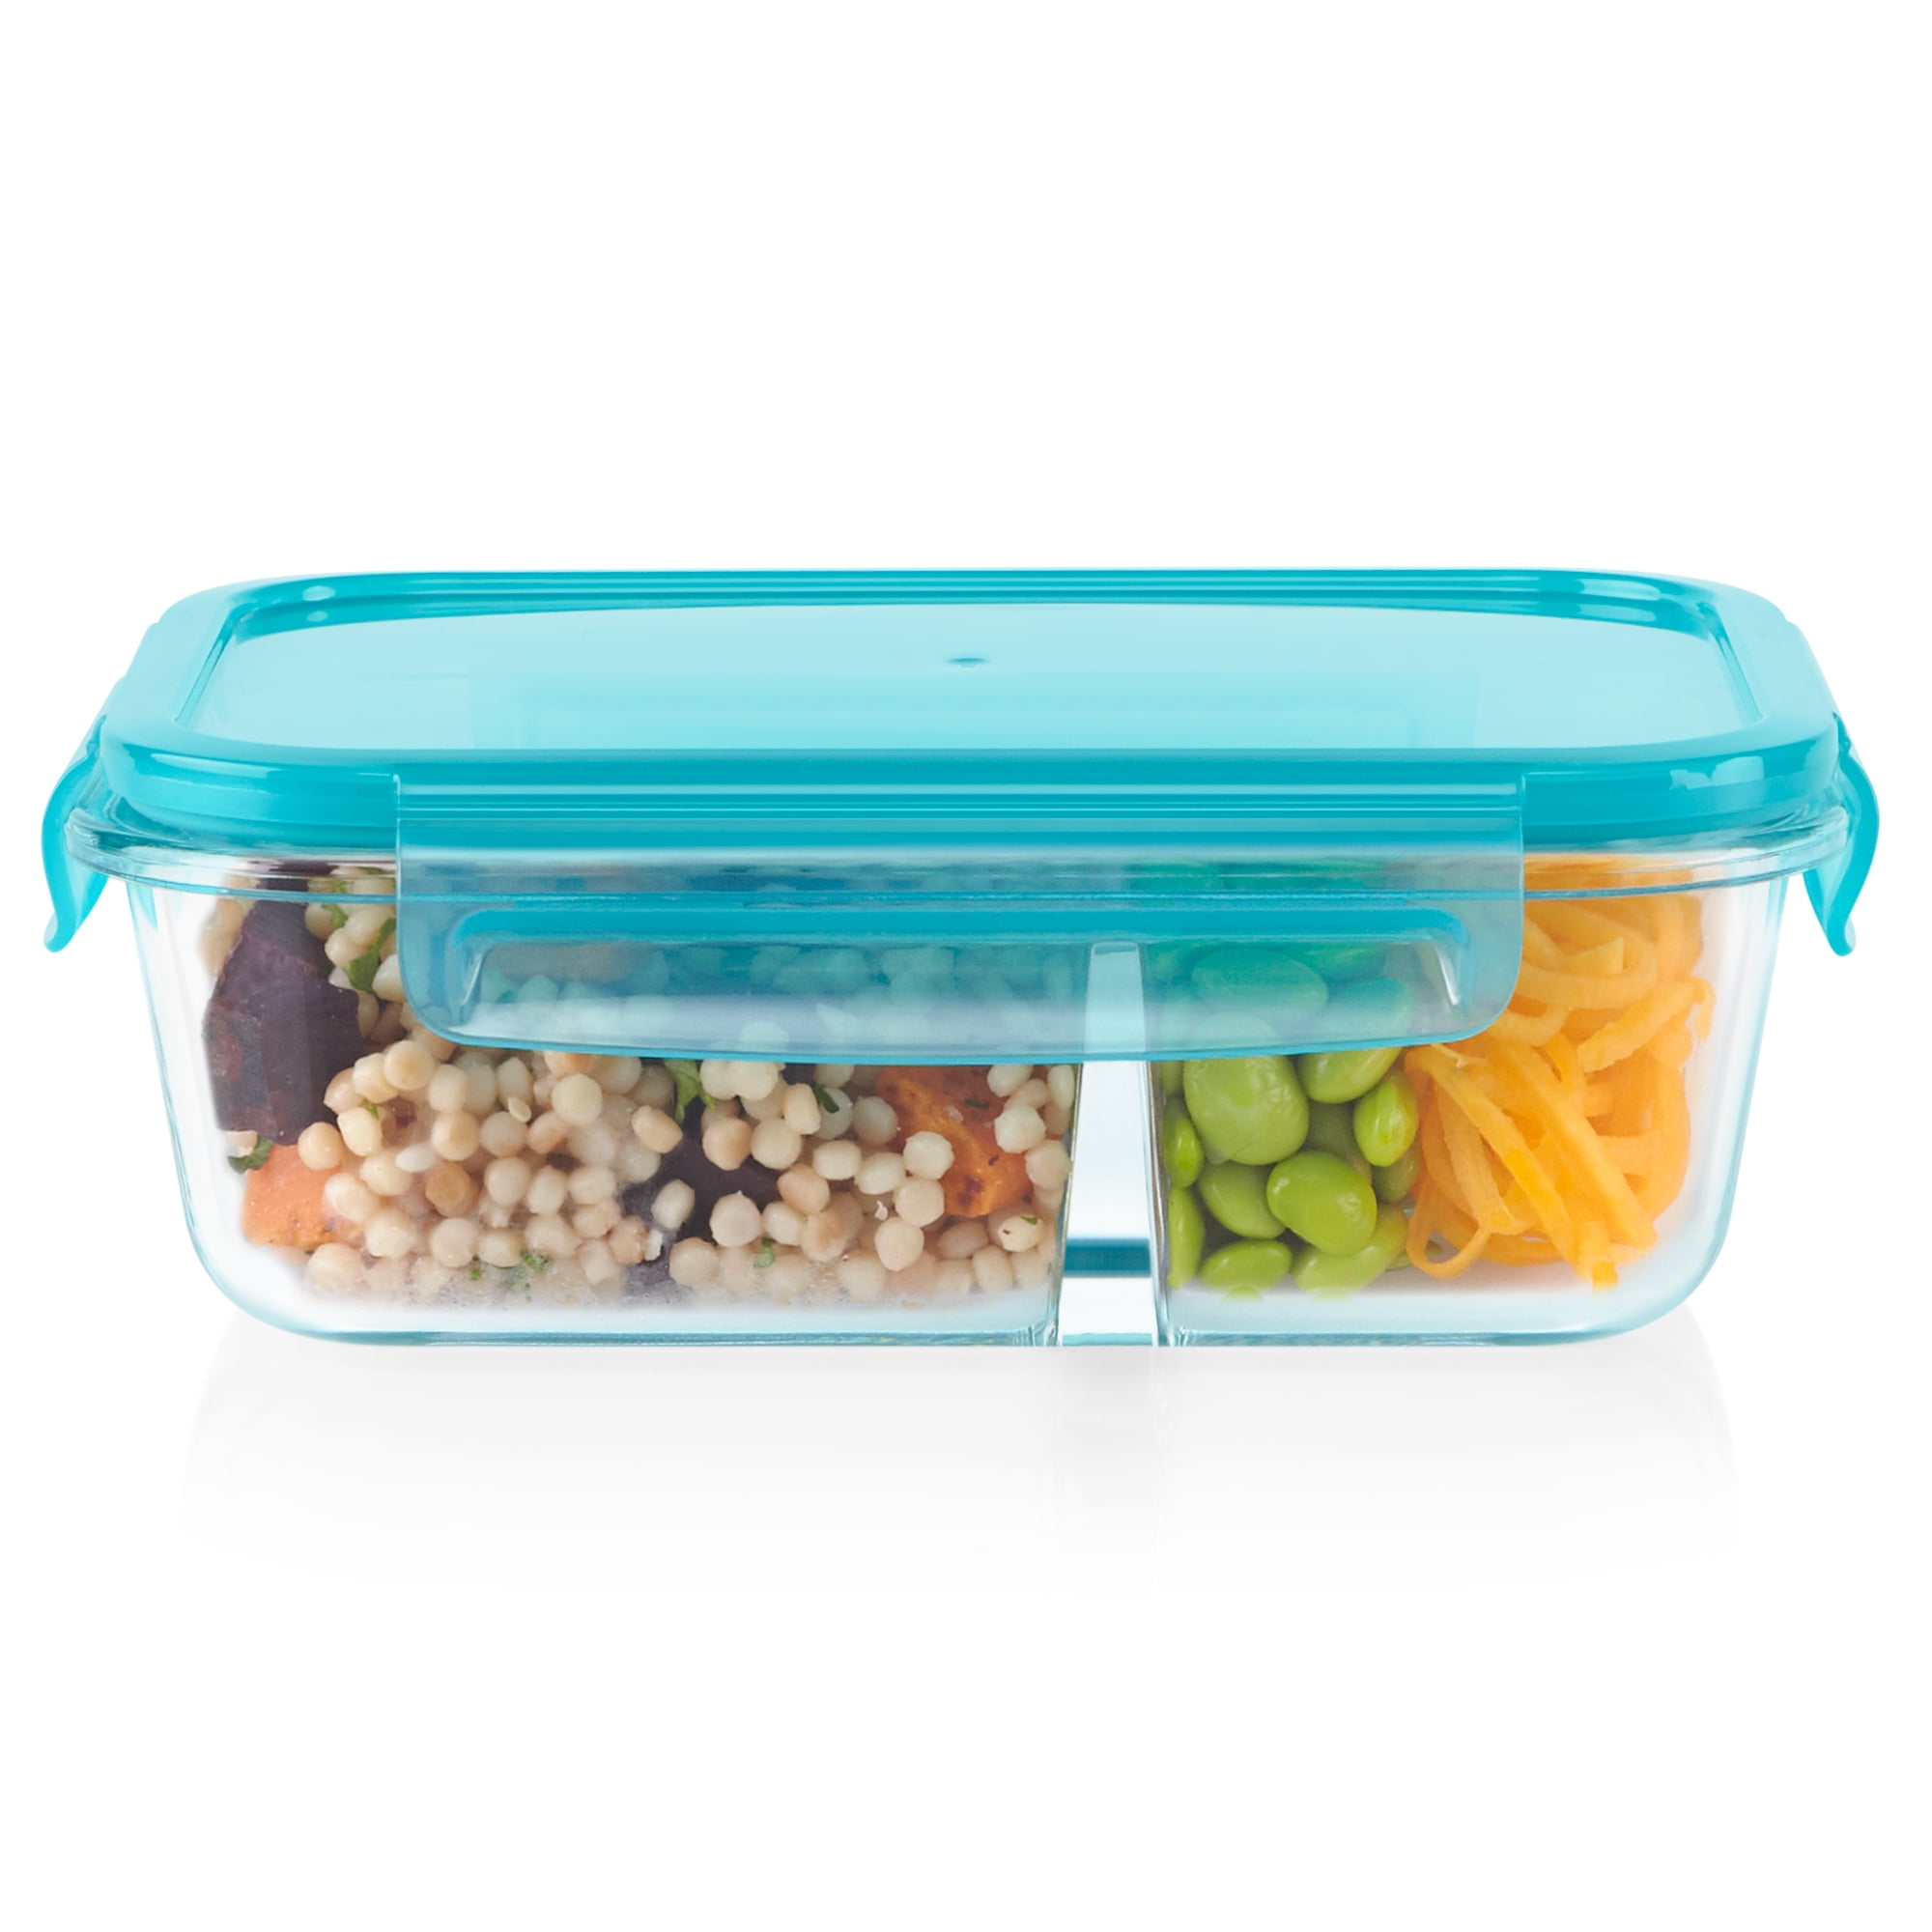 Pyrex Meal Prep Glass Storage Container, 4-cup 